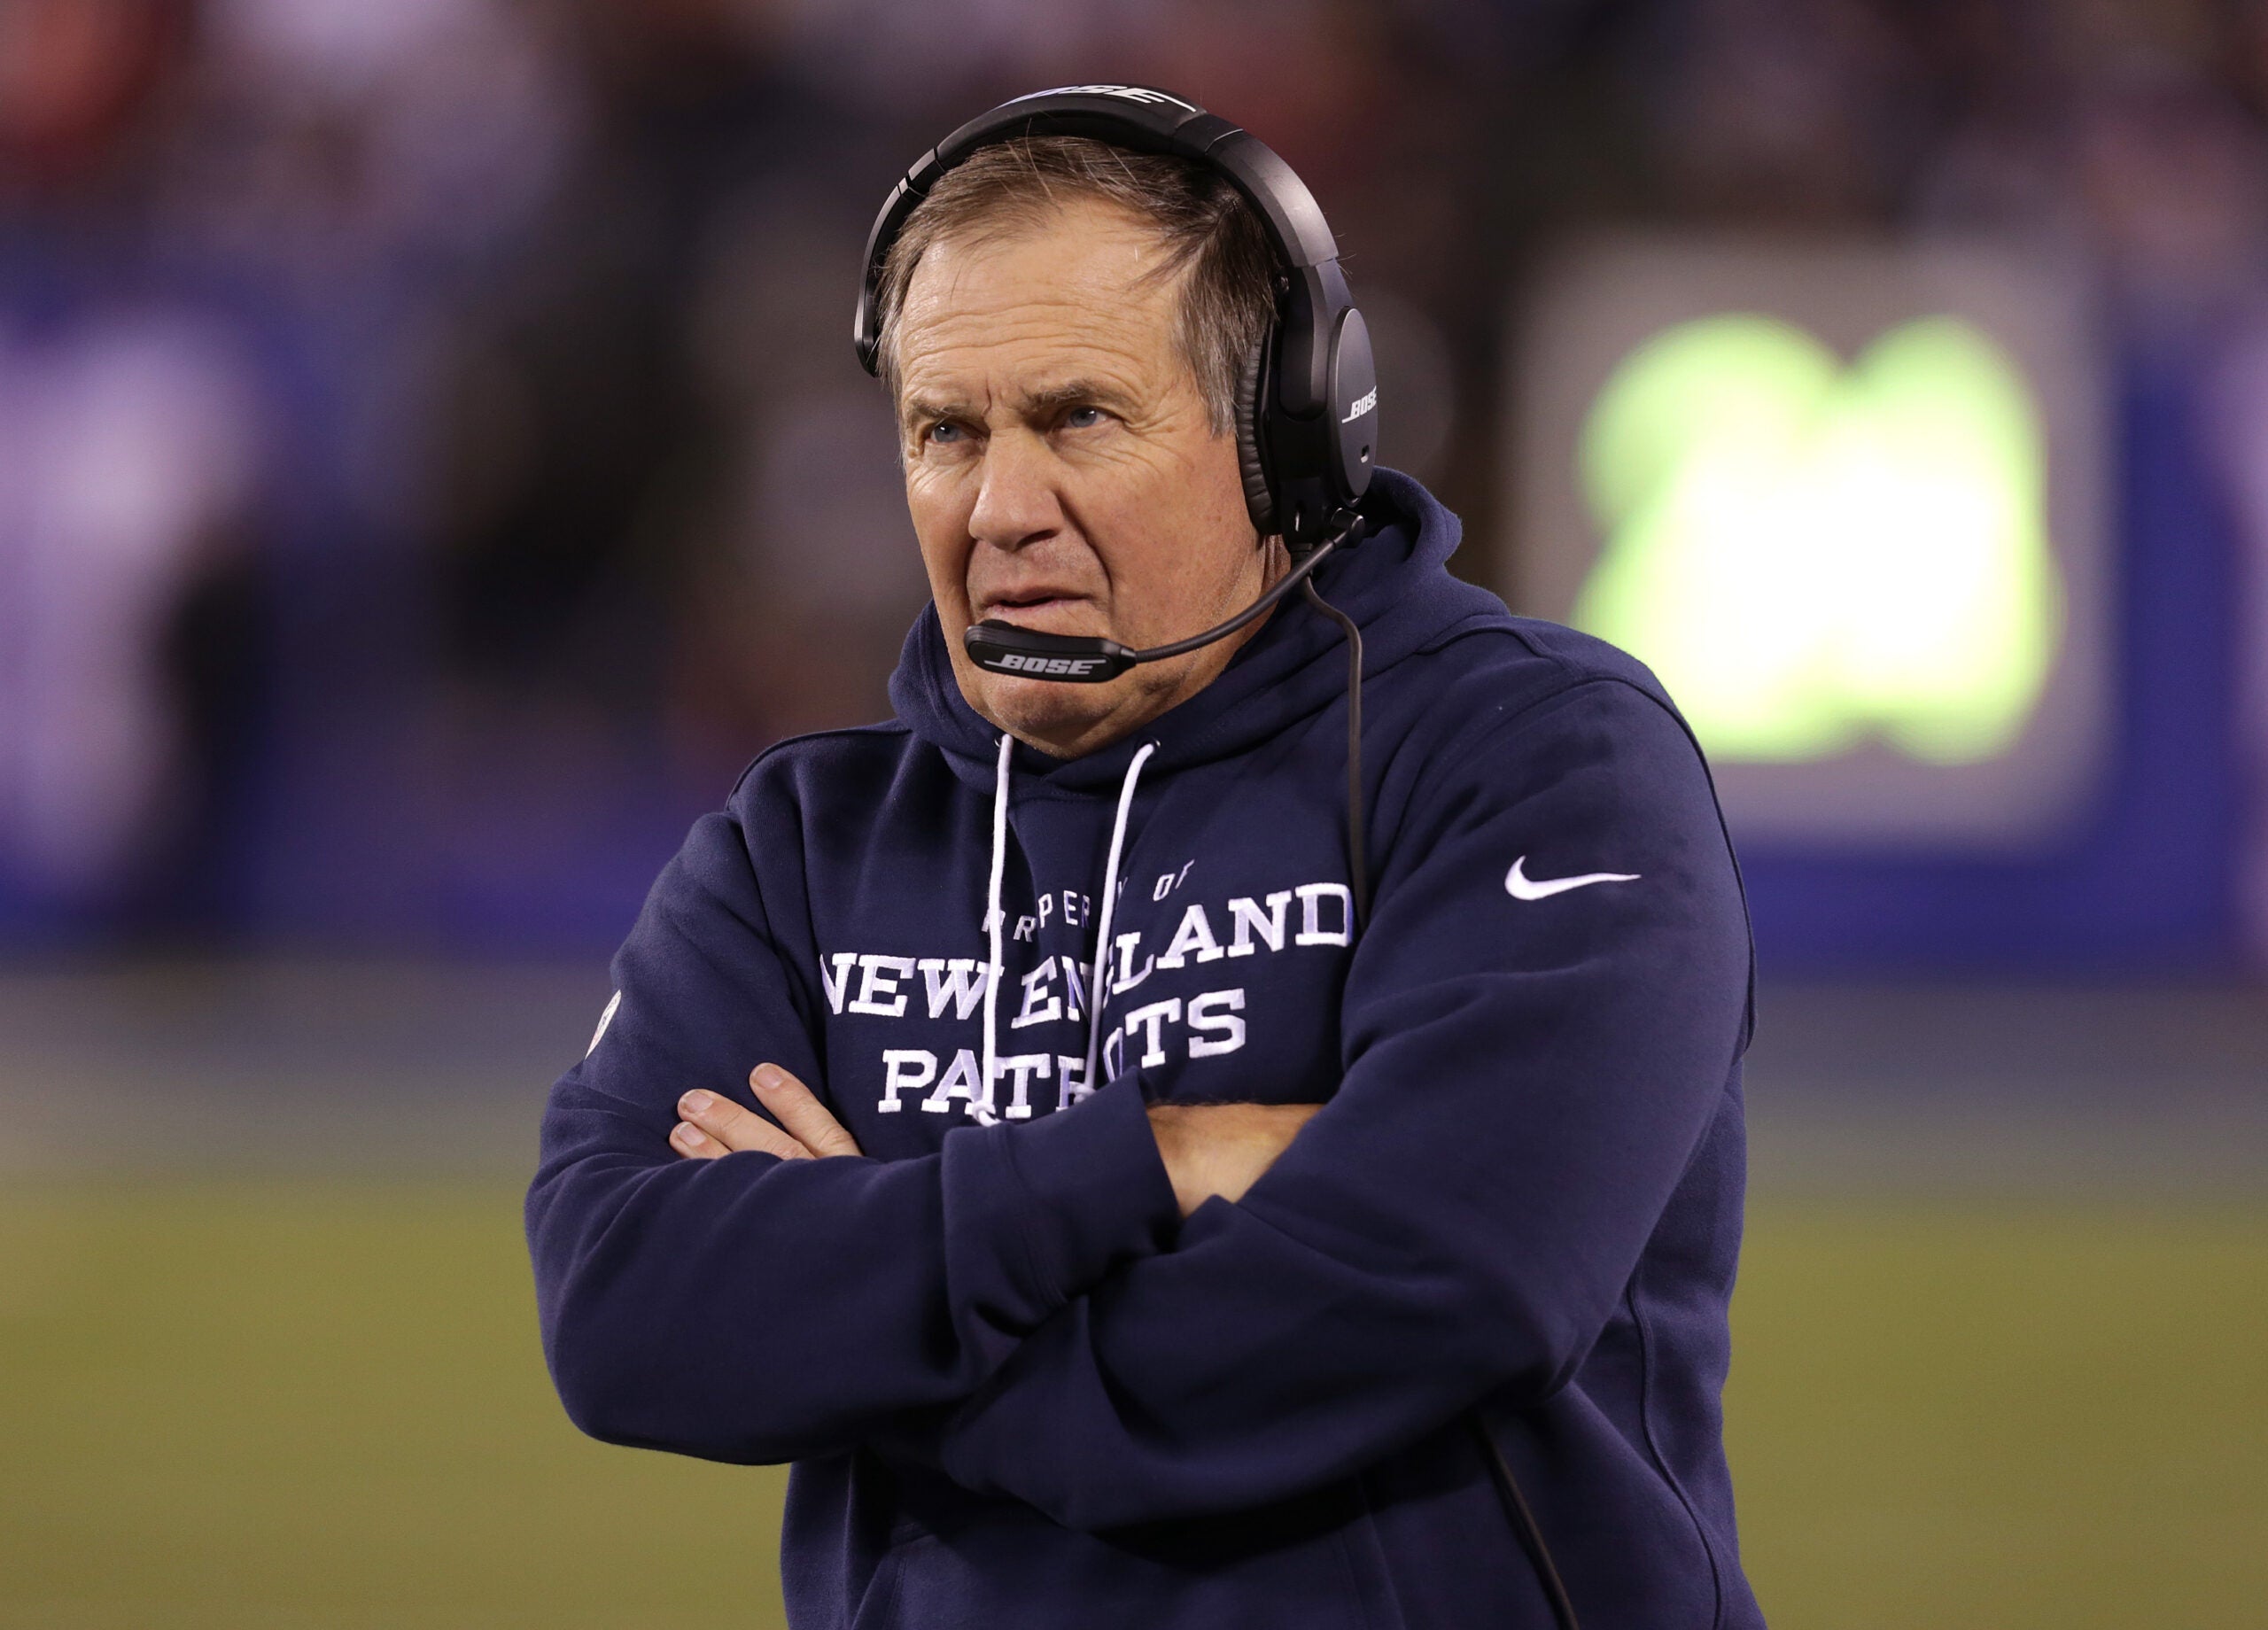 Bill Belichick addressed why he doesn't wear the NFL's 'Salute to Service'  gear